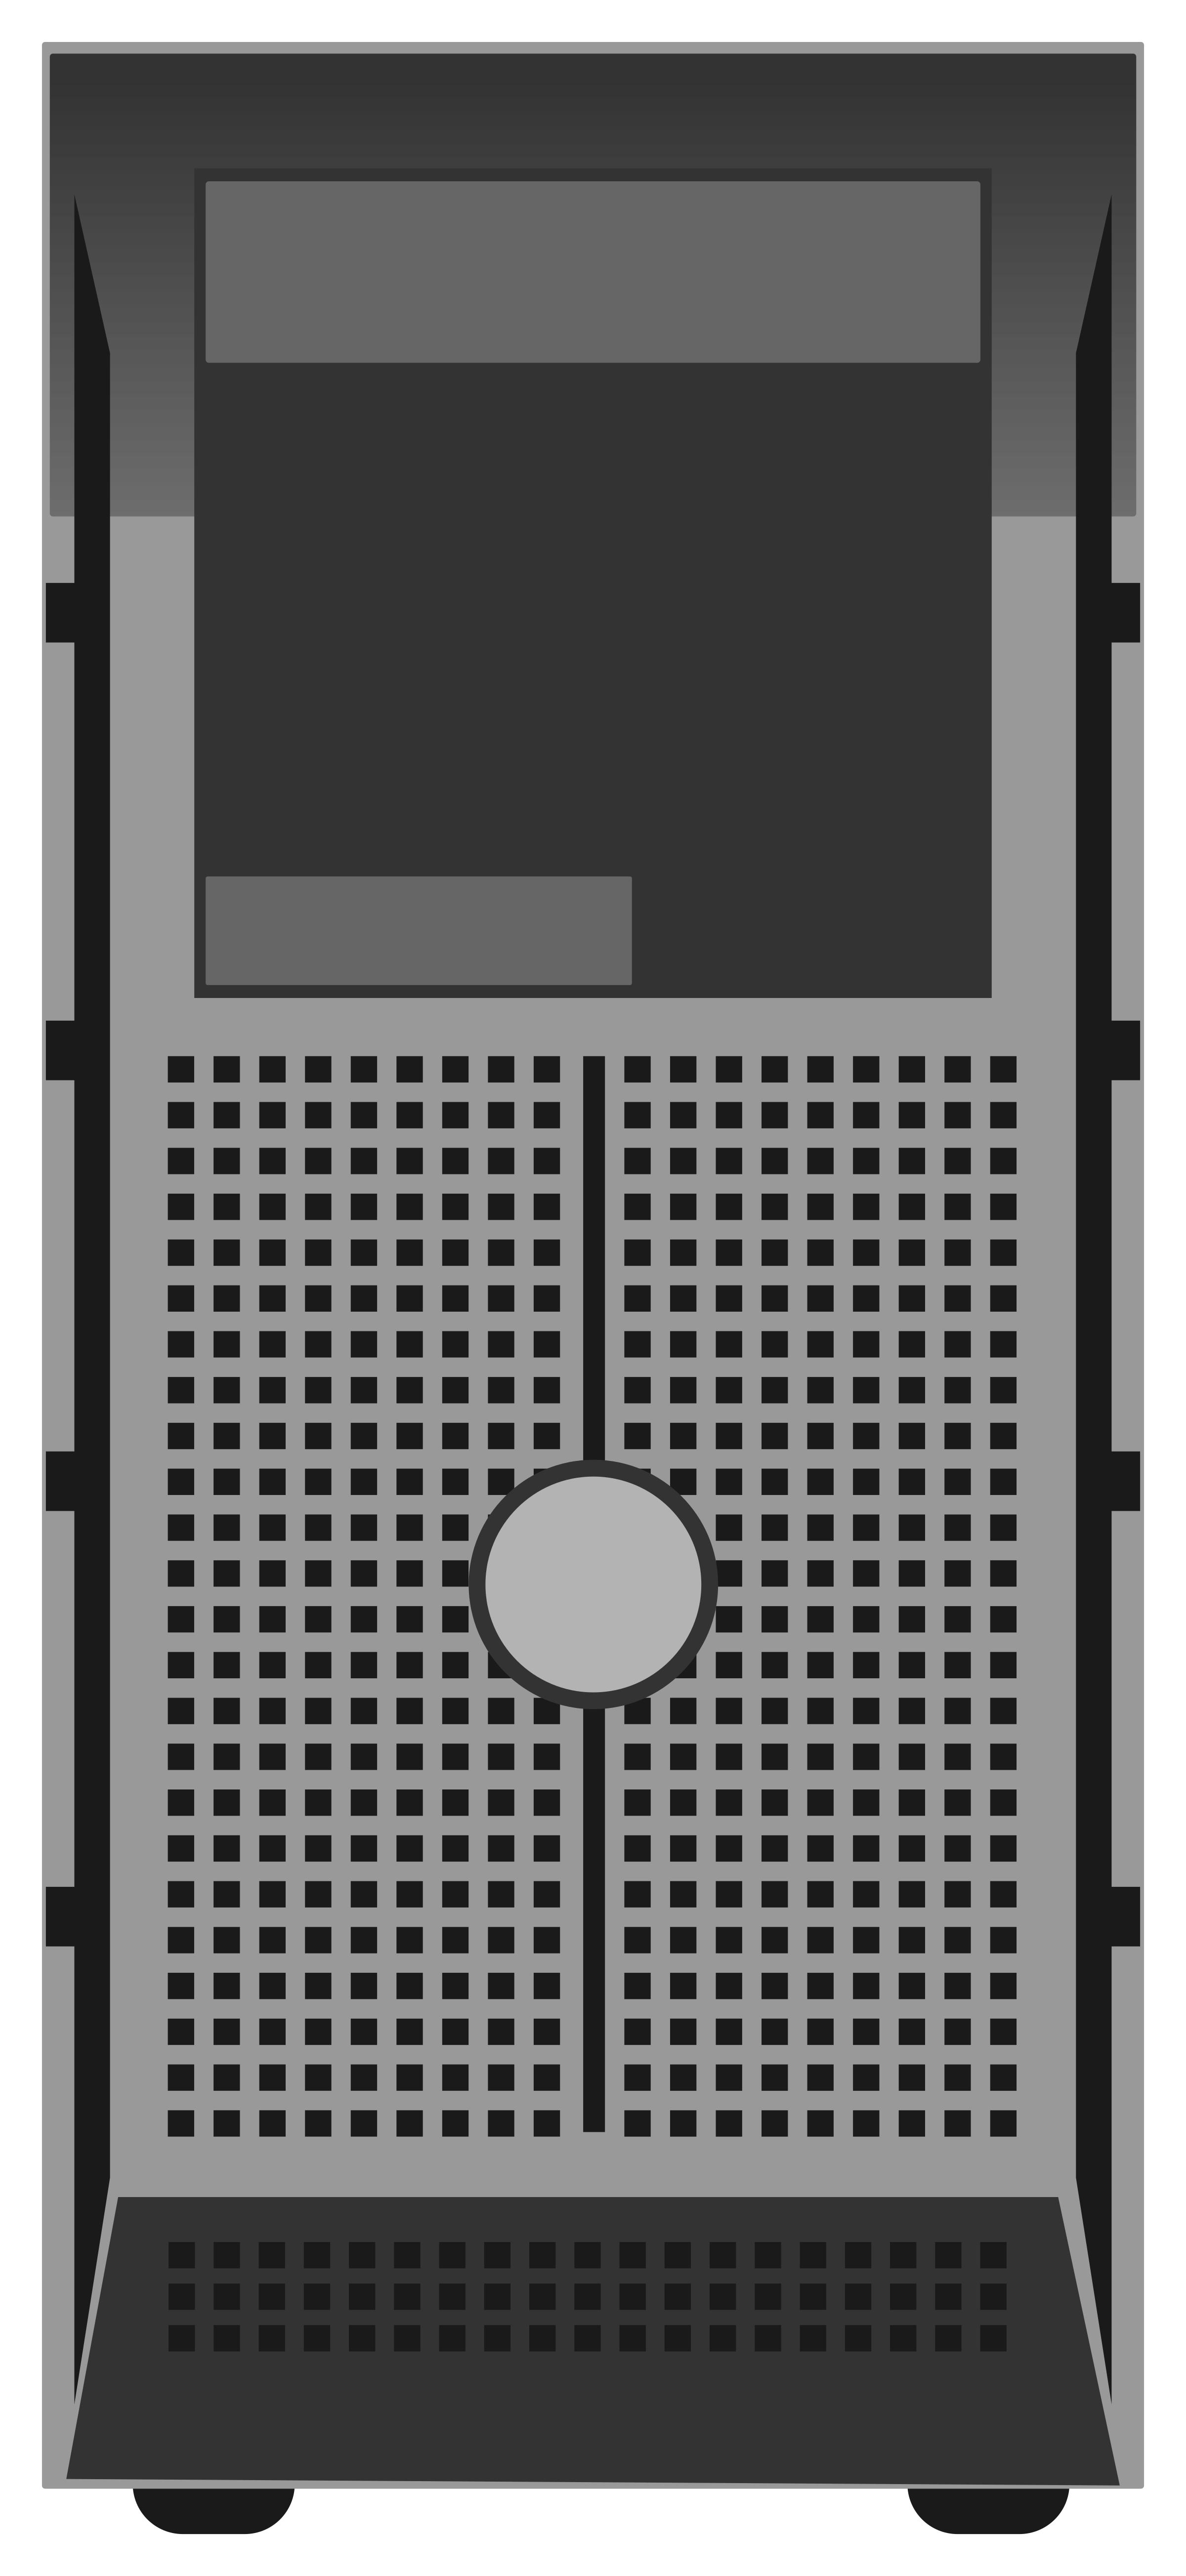 Dell T300 Server png